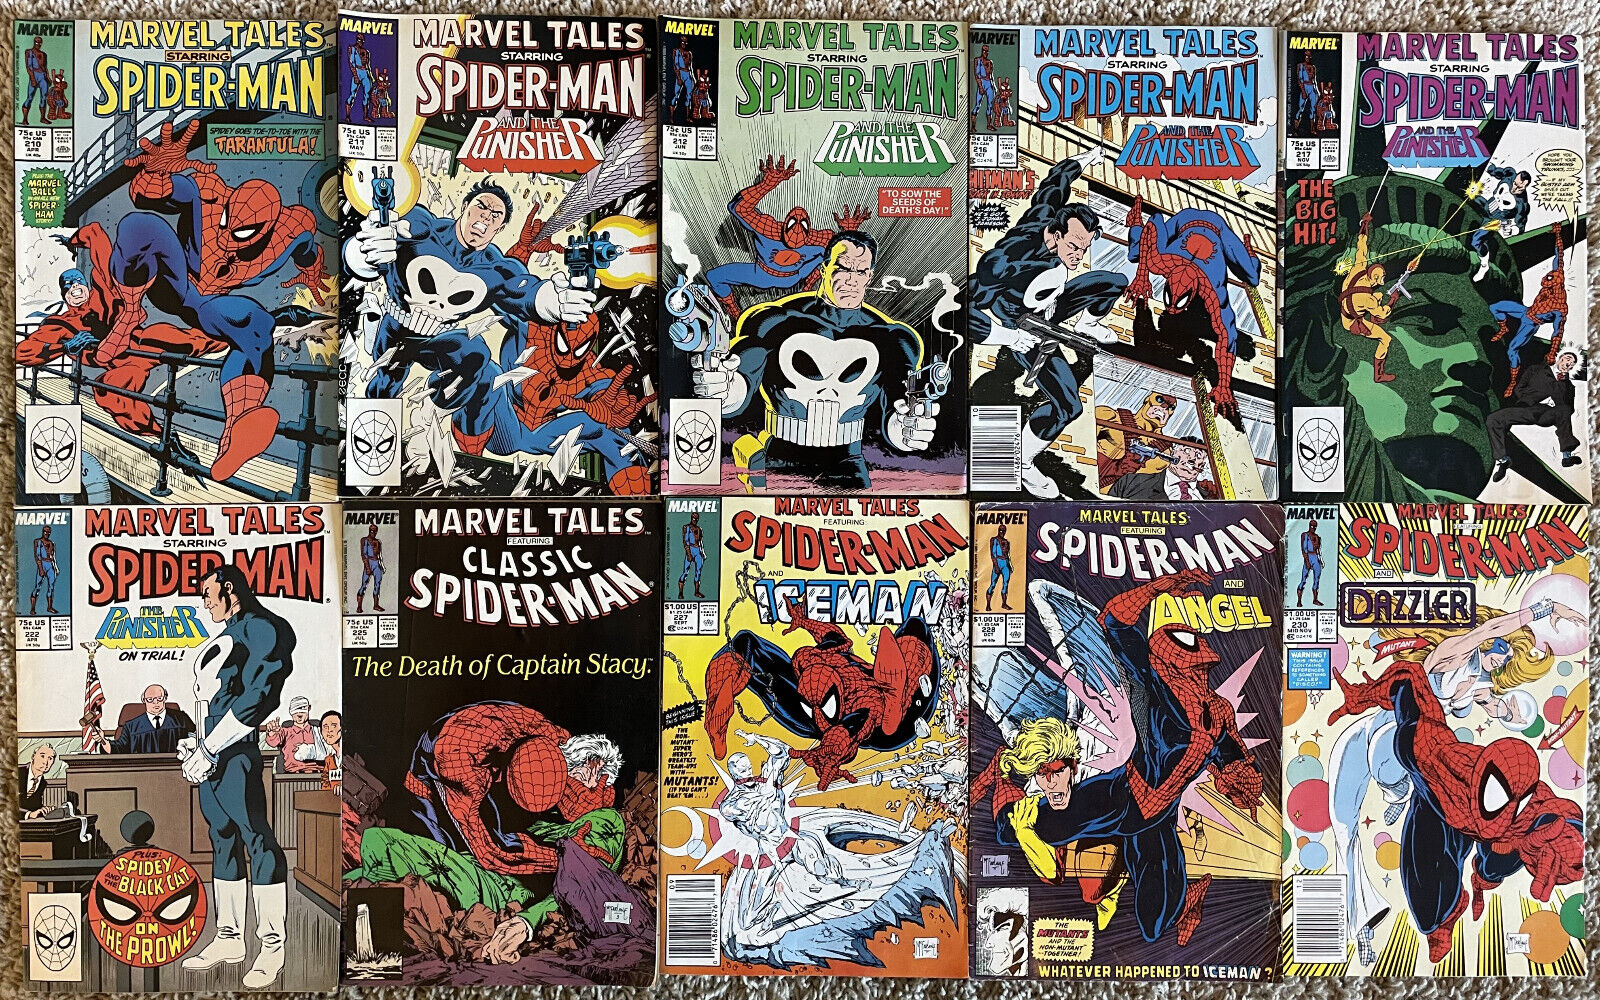 Marvel Tales Spider-Man Lot #19 Marvel comic  series from the 1970s